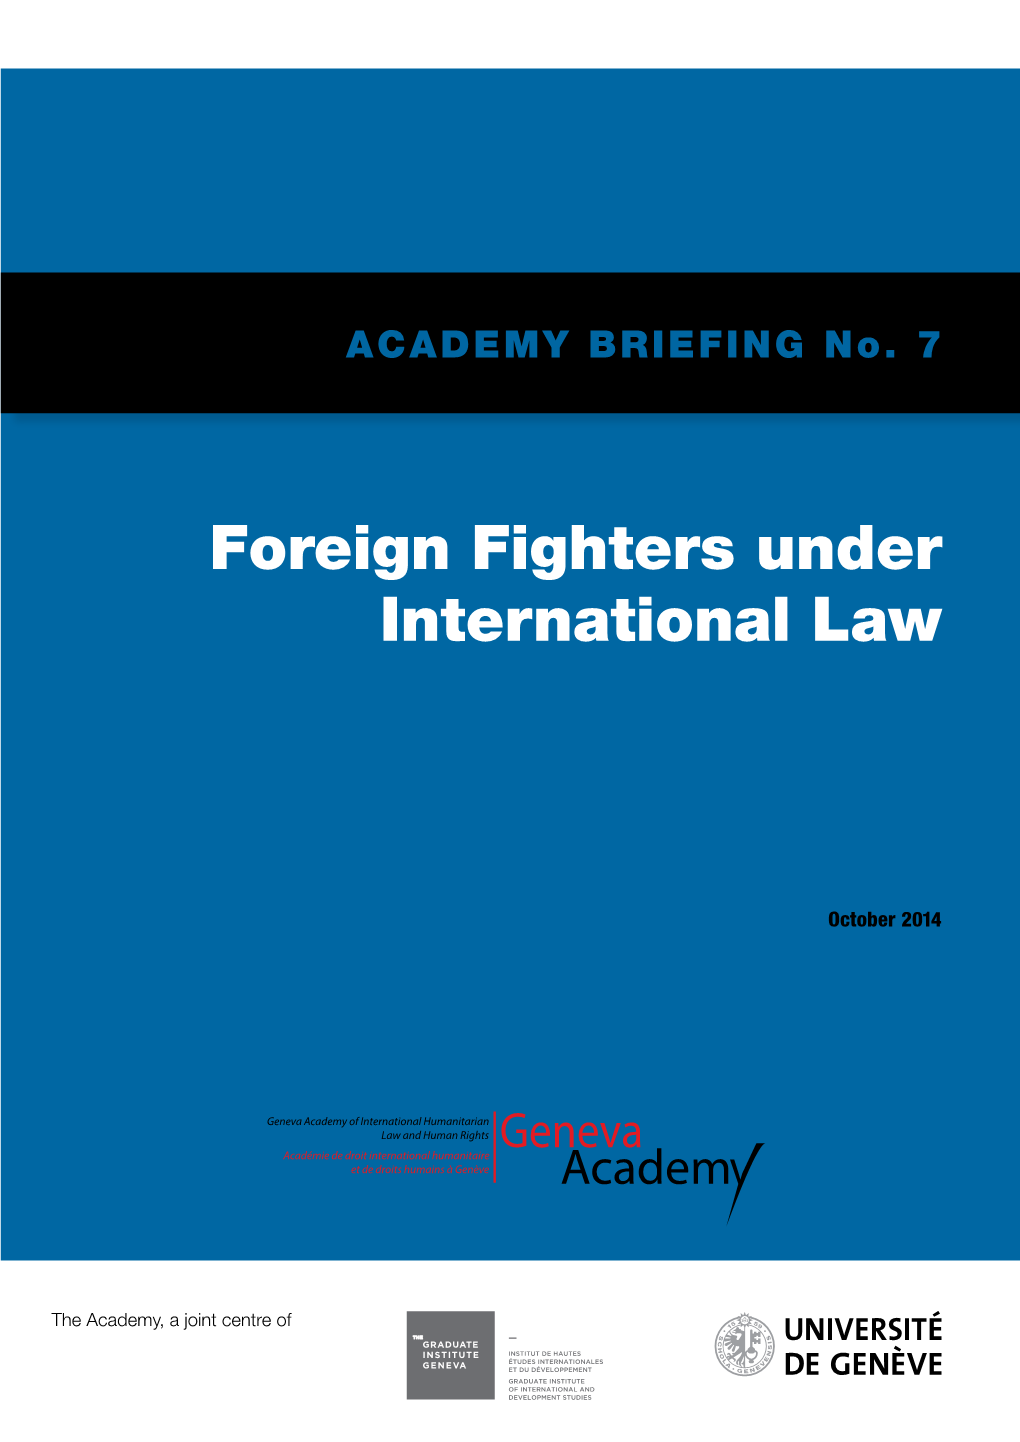 Foreign Fighters Under International Law